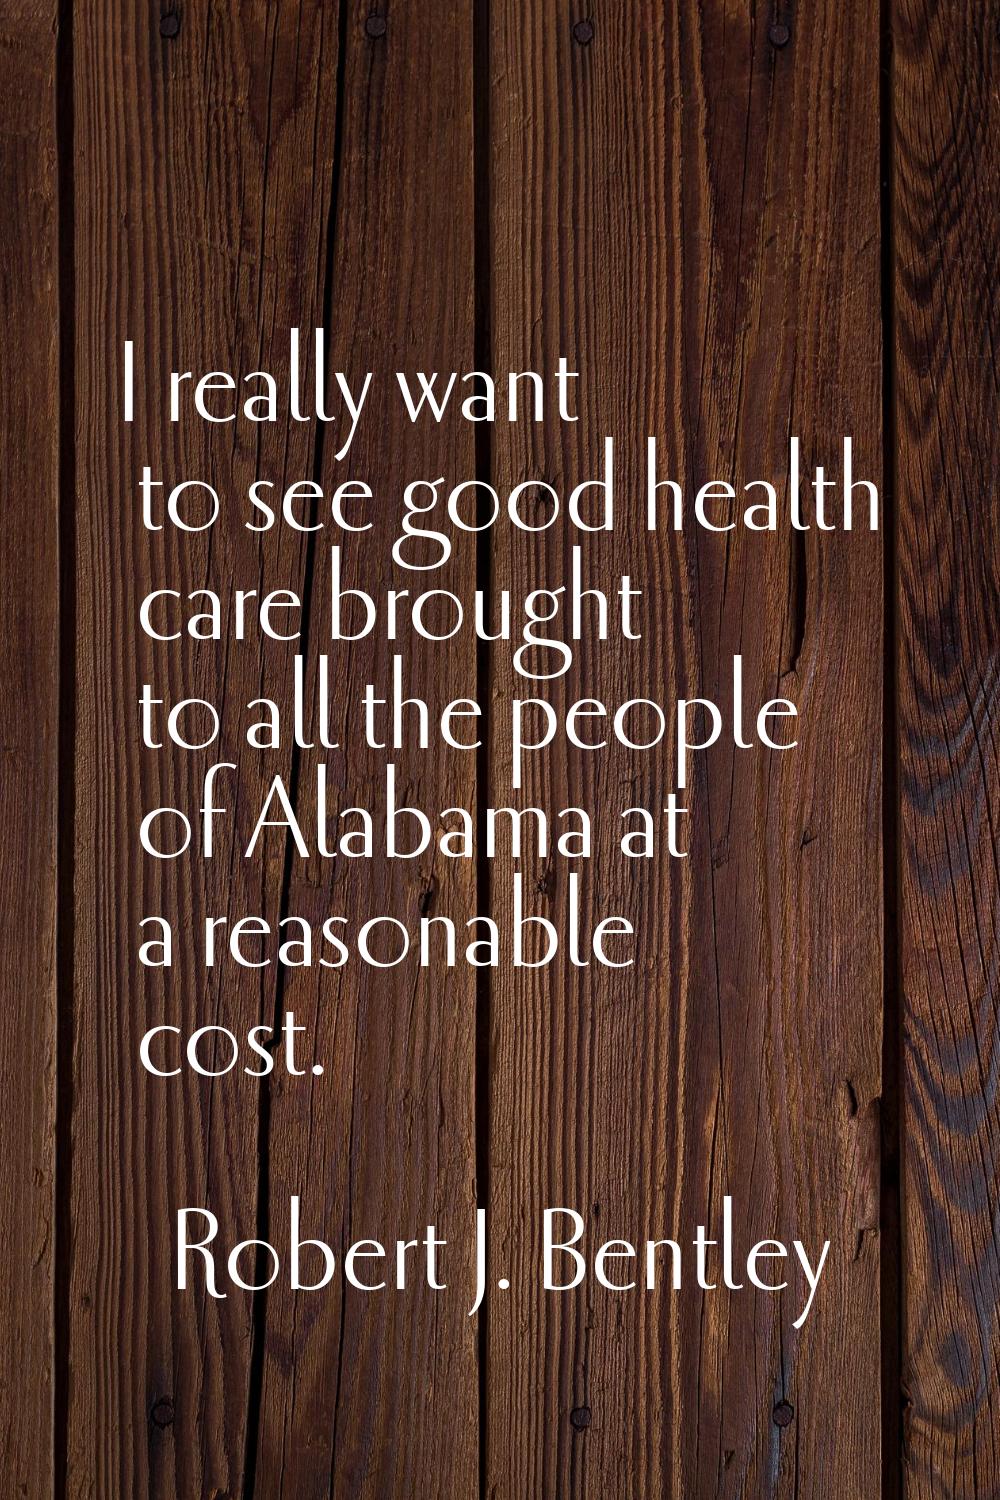 I really want to see good health care brought to all the people of Alabama at a reasonable cost.